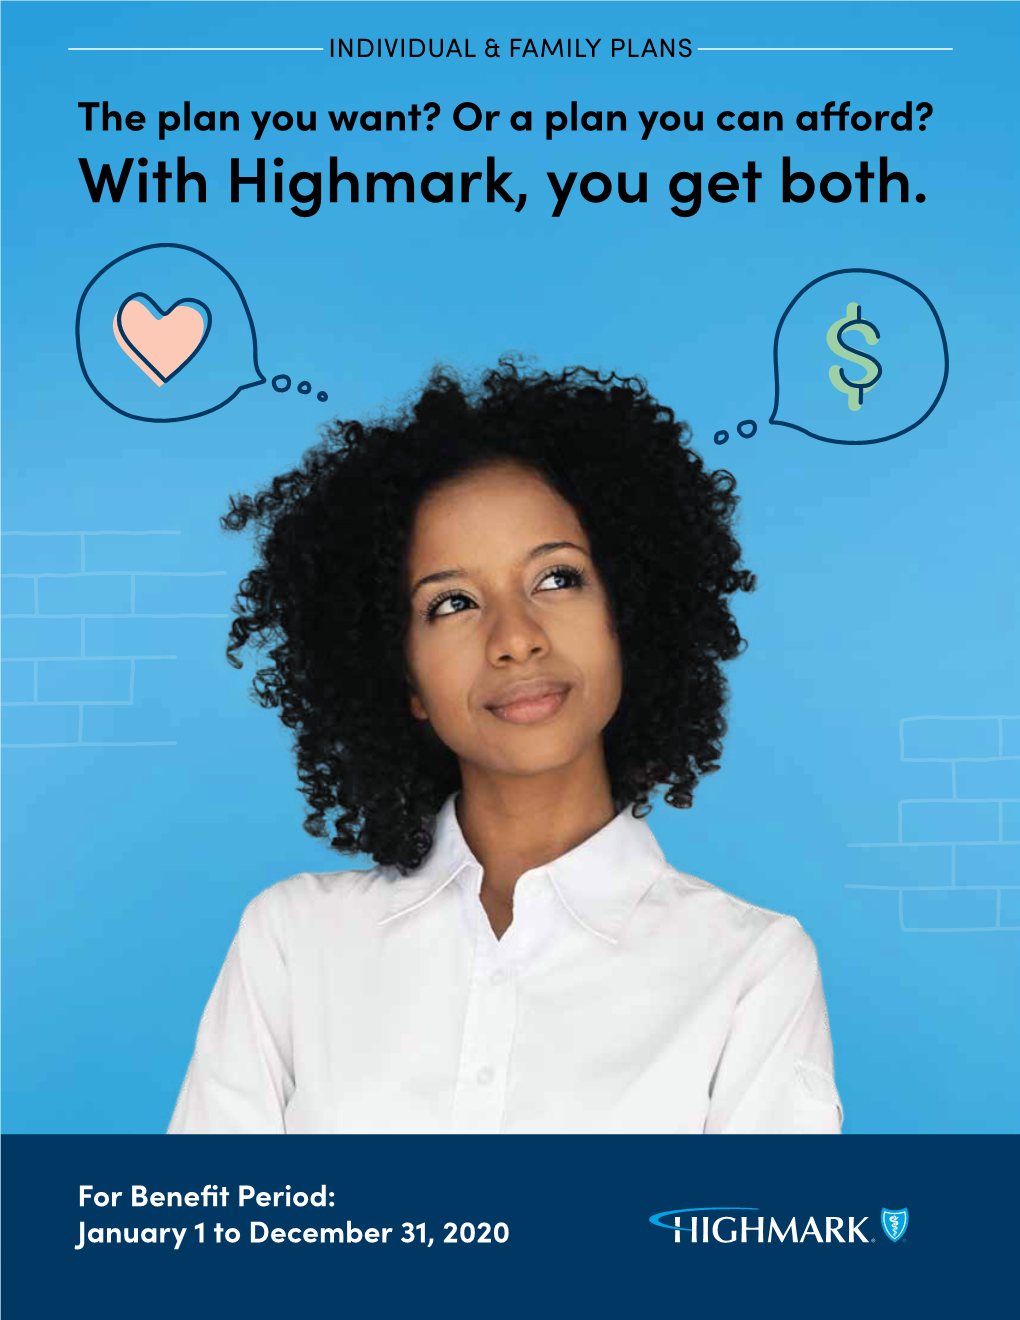 The Plan You Want? Or a Plan You Can Afford? with Highmark, You Get Both